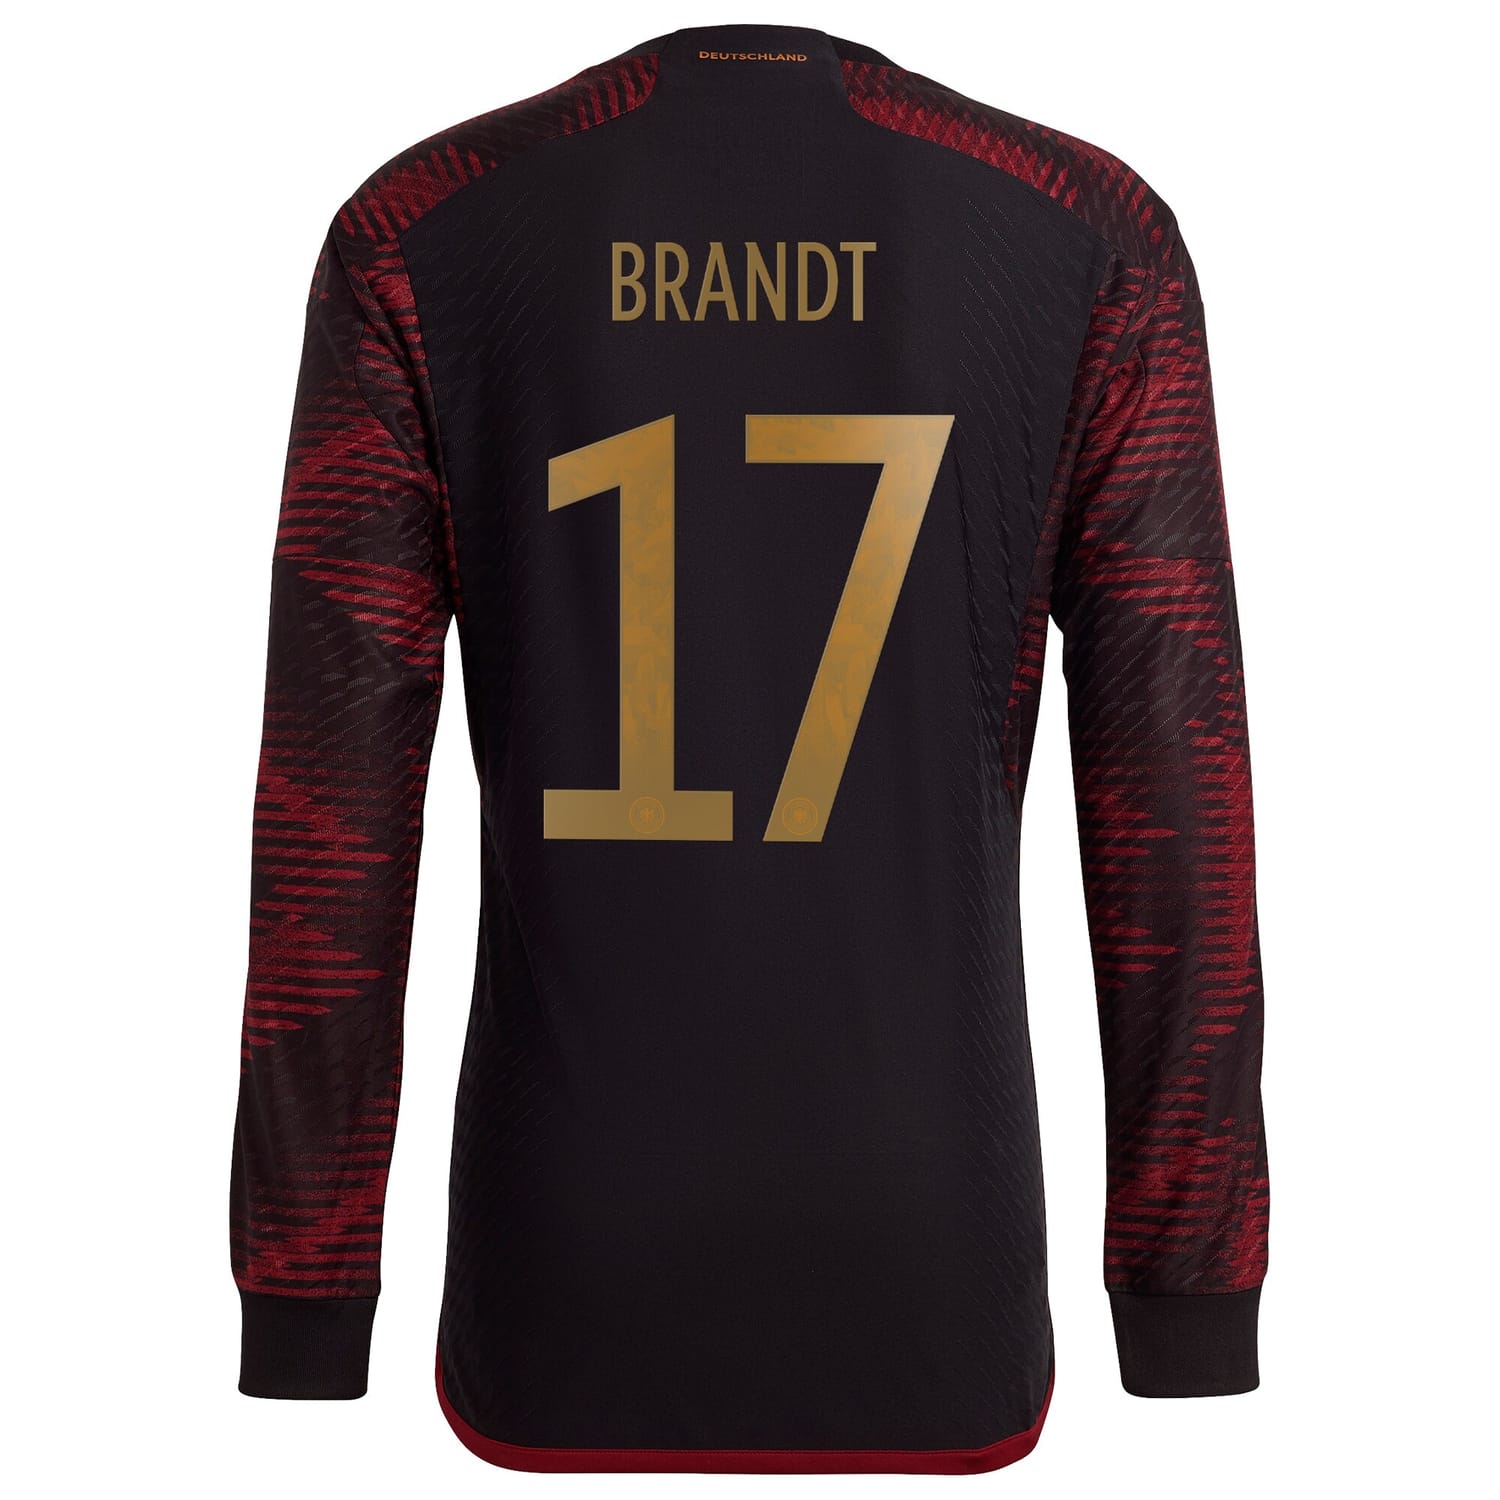 Germany National Team Away Authentic Jersey Shirt Long Sleeve 2022 player Julian Brandt 17 printing for Men